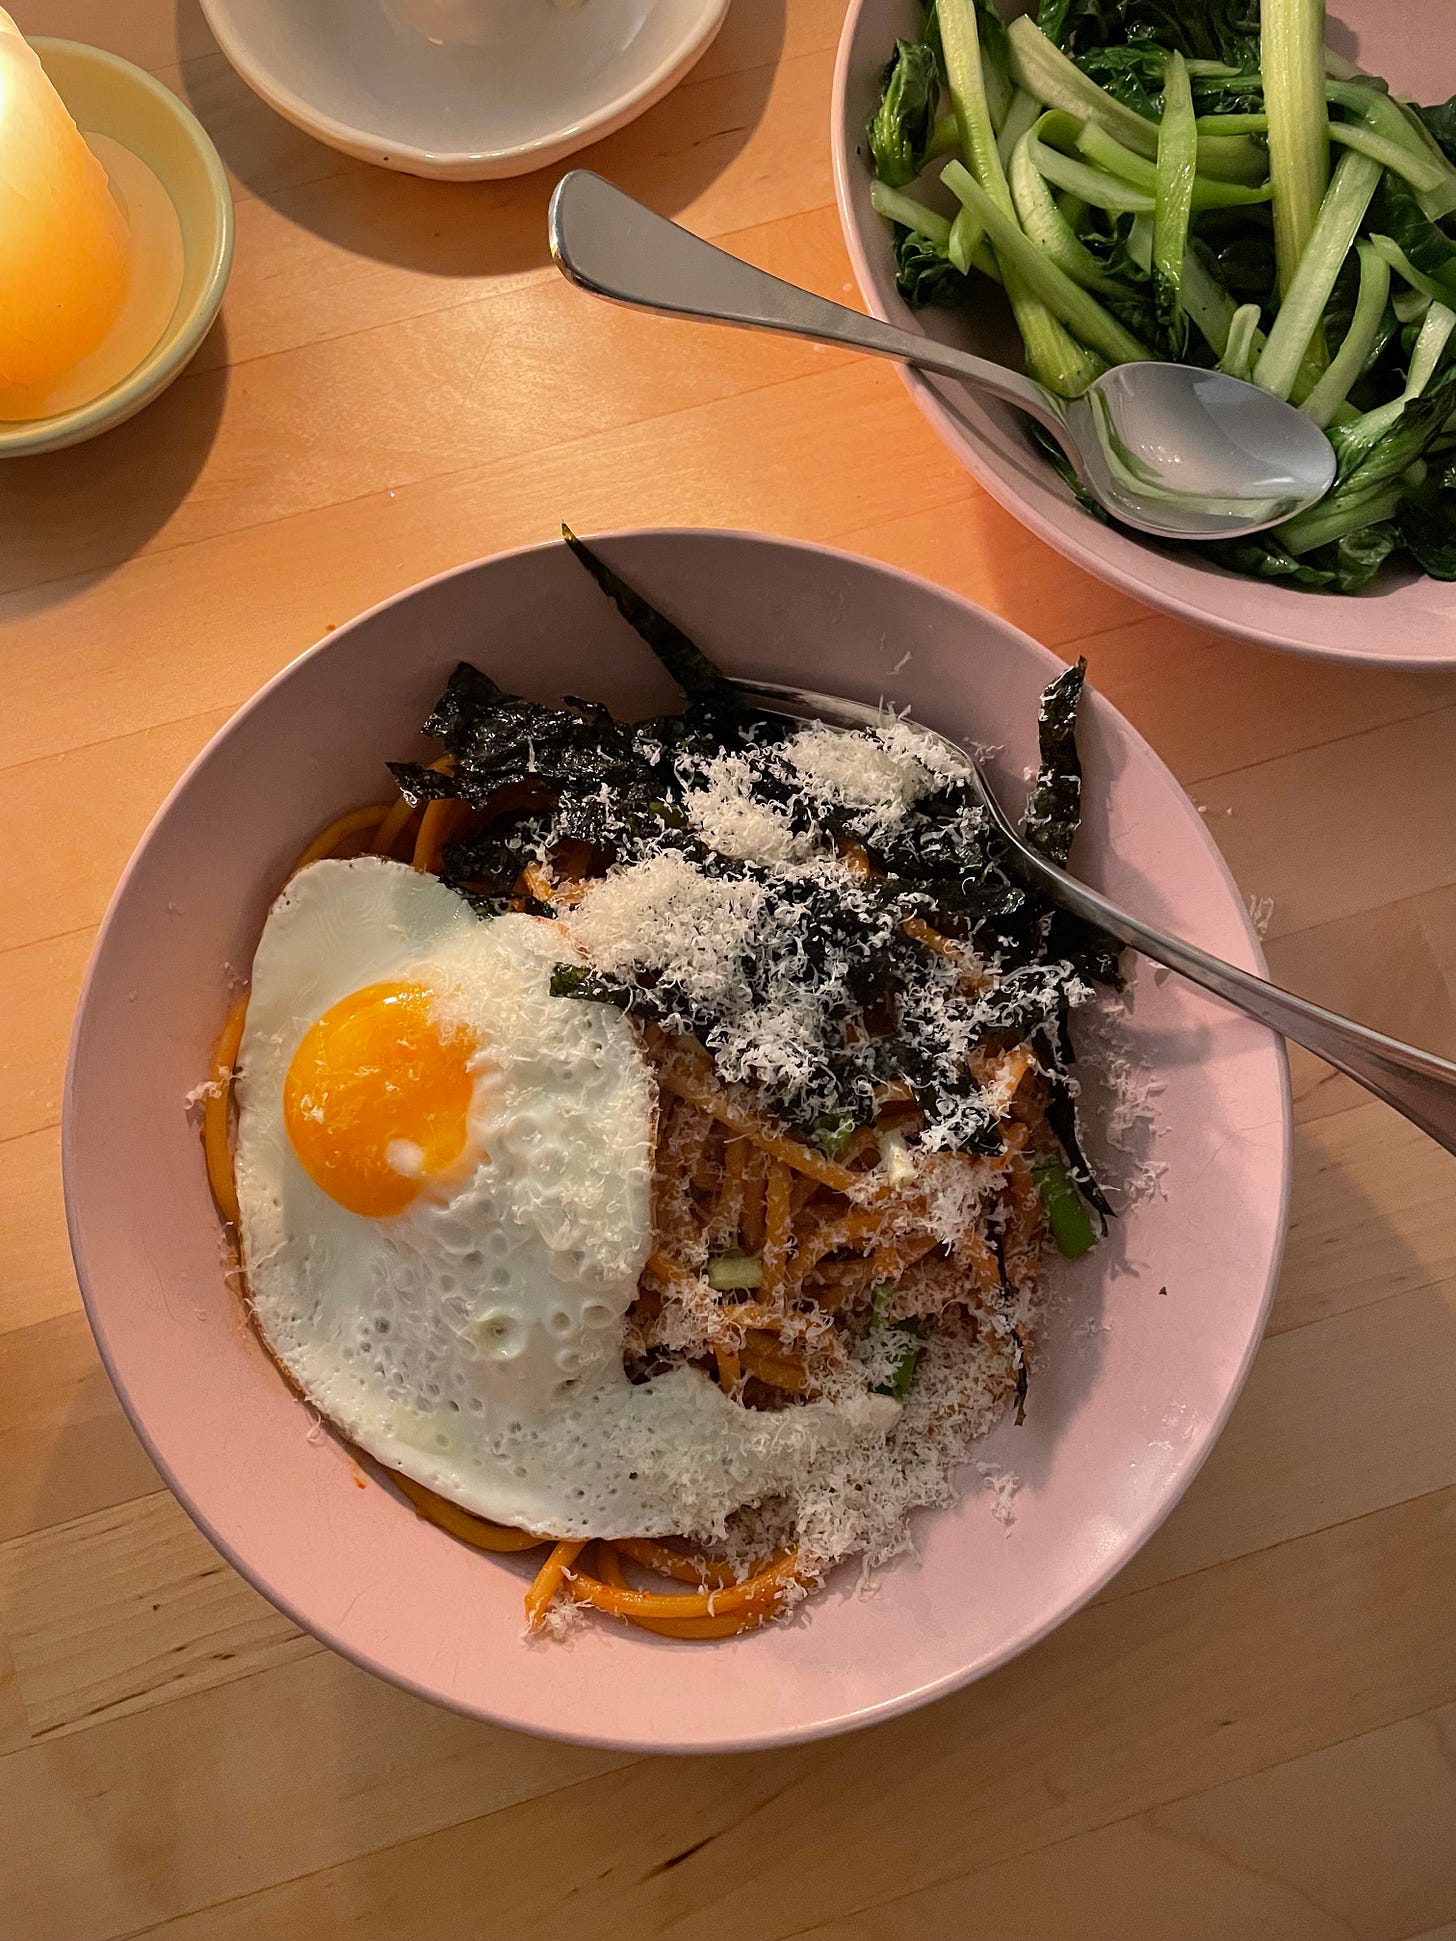 Bowl of kimchi linguini topped with roasted seaweed, parmesan and a fried egg. Garlicky greens in a bowl nearby.